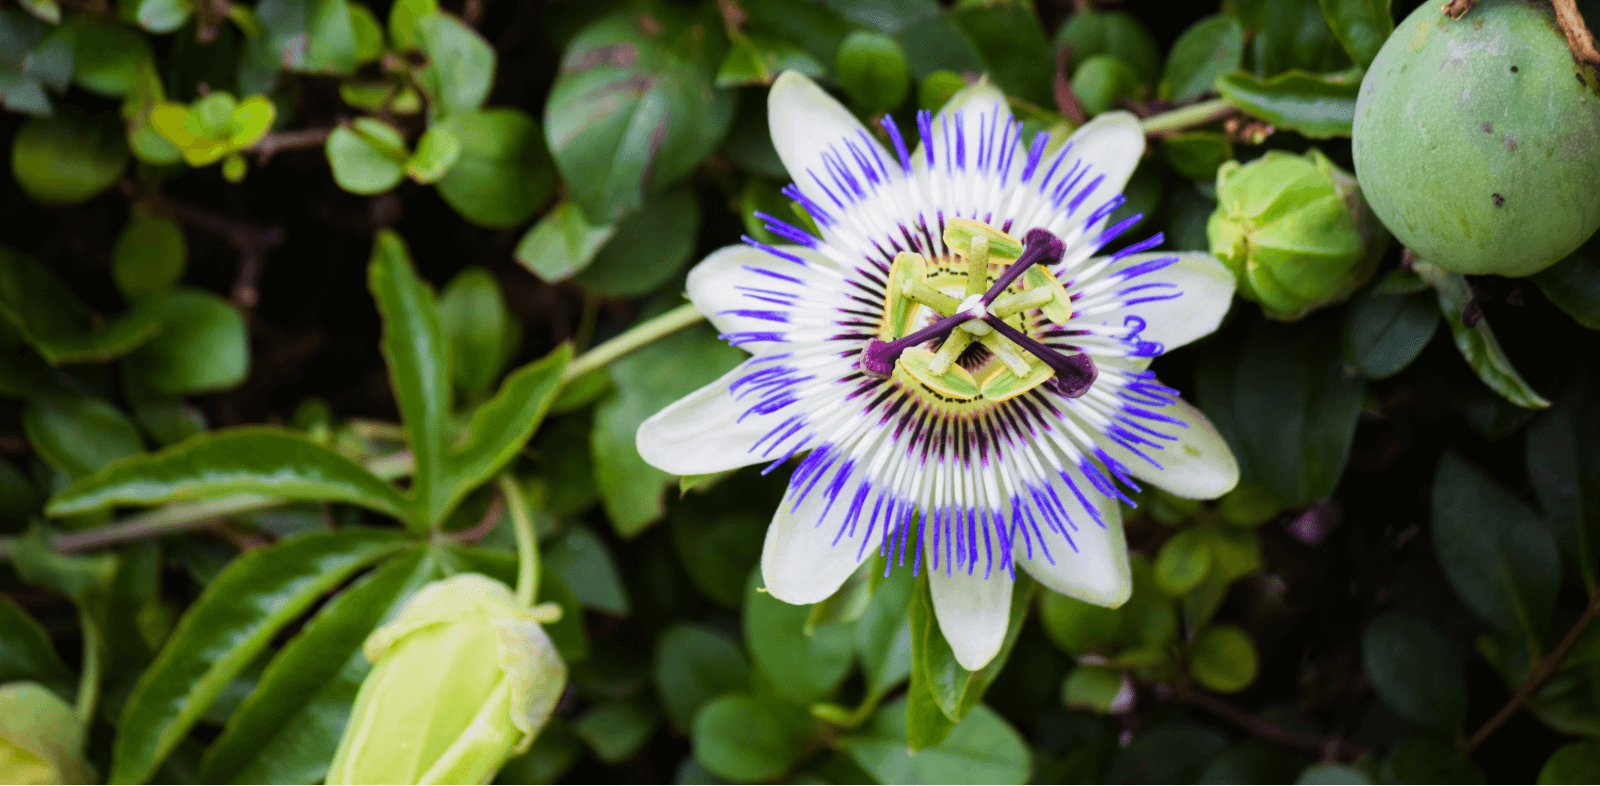 taking passion flower for anxiety: how effective is it?